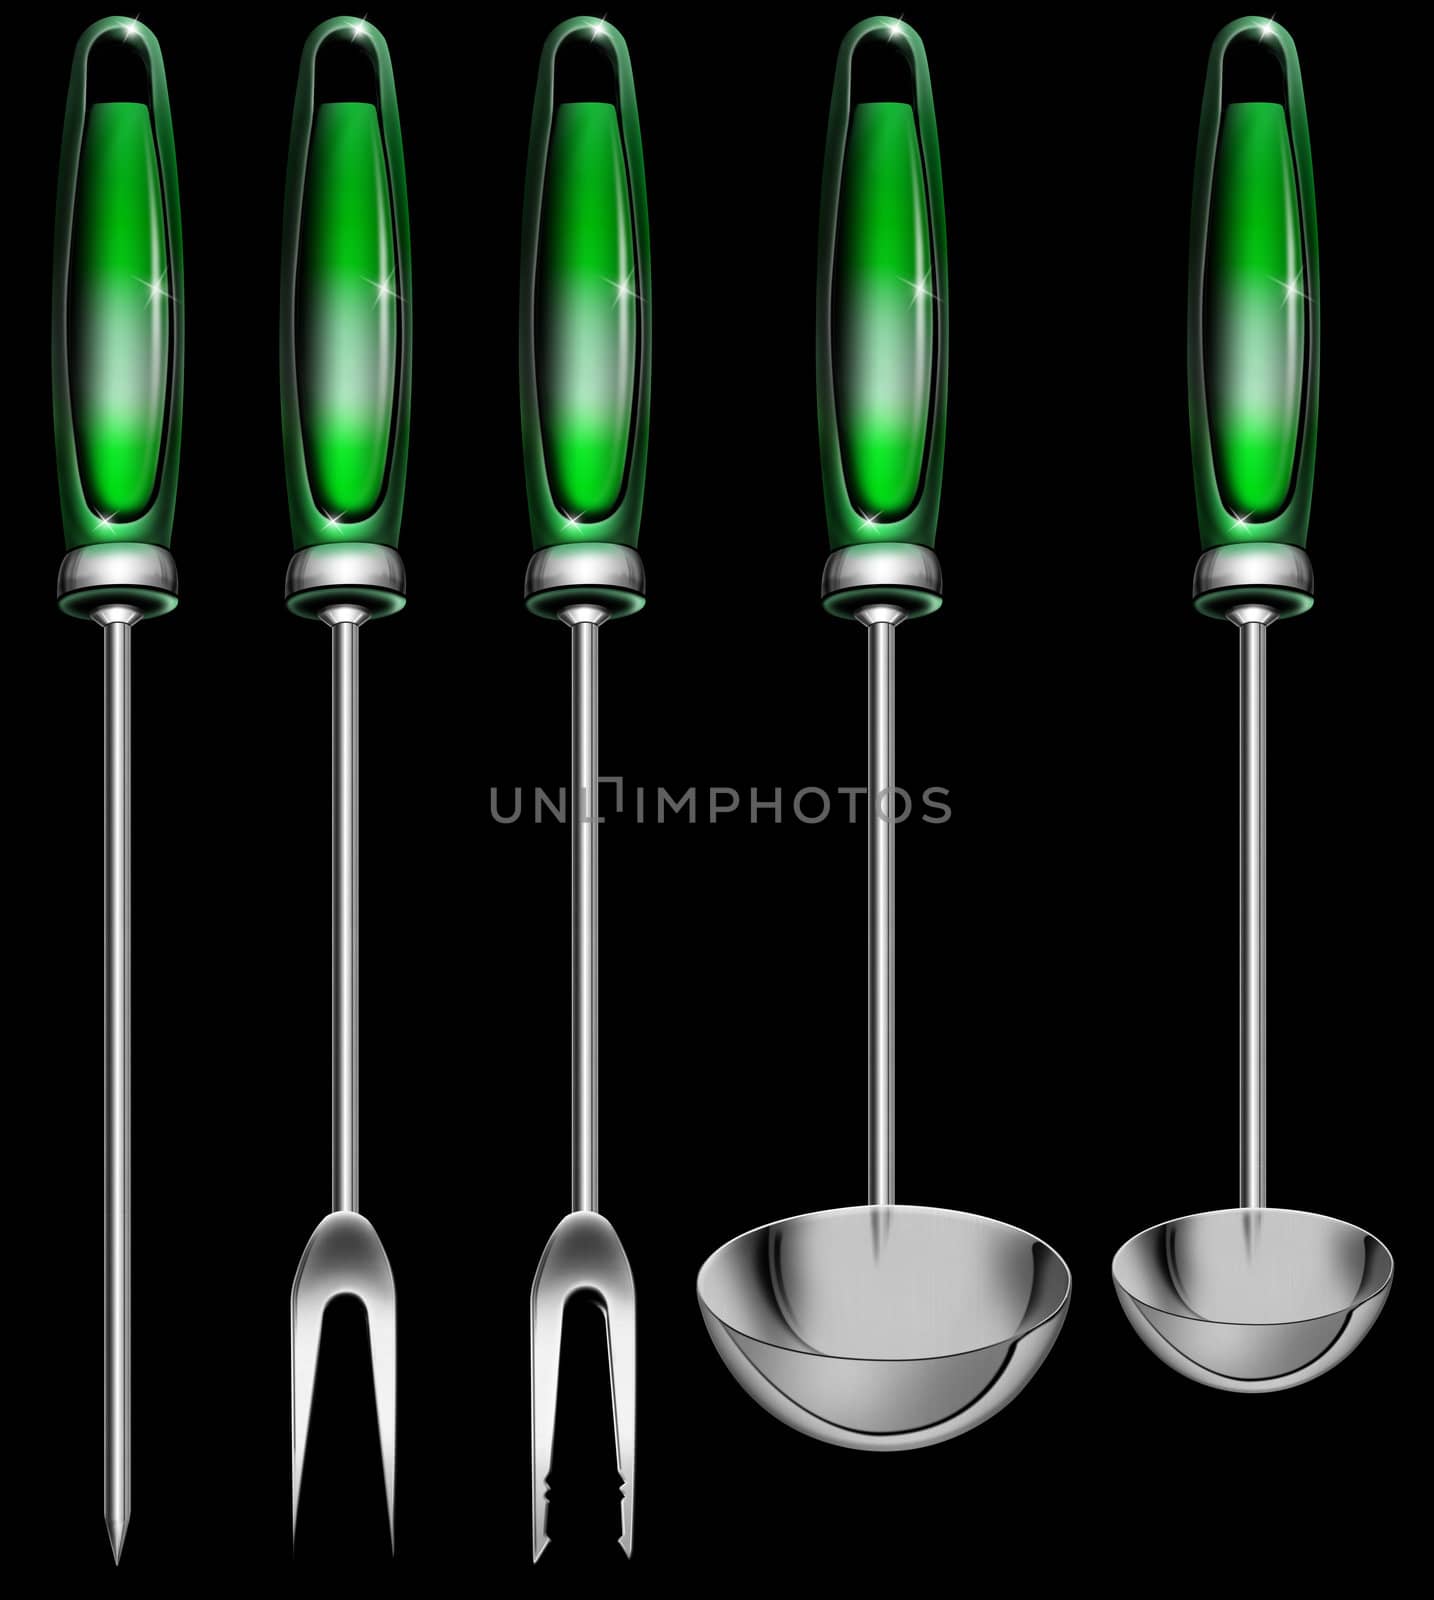 Illustration with four kitchen utensils, 2 ladles, 2 forks and awl on a black background